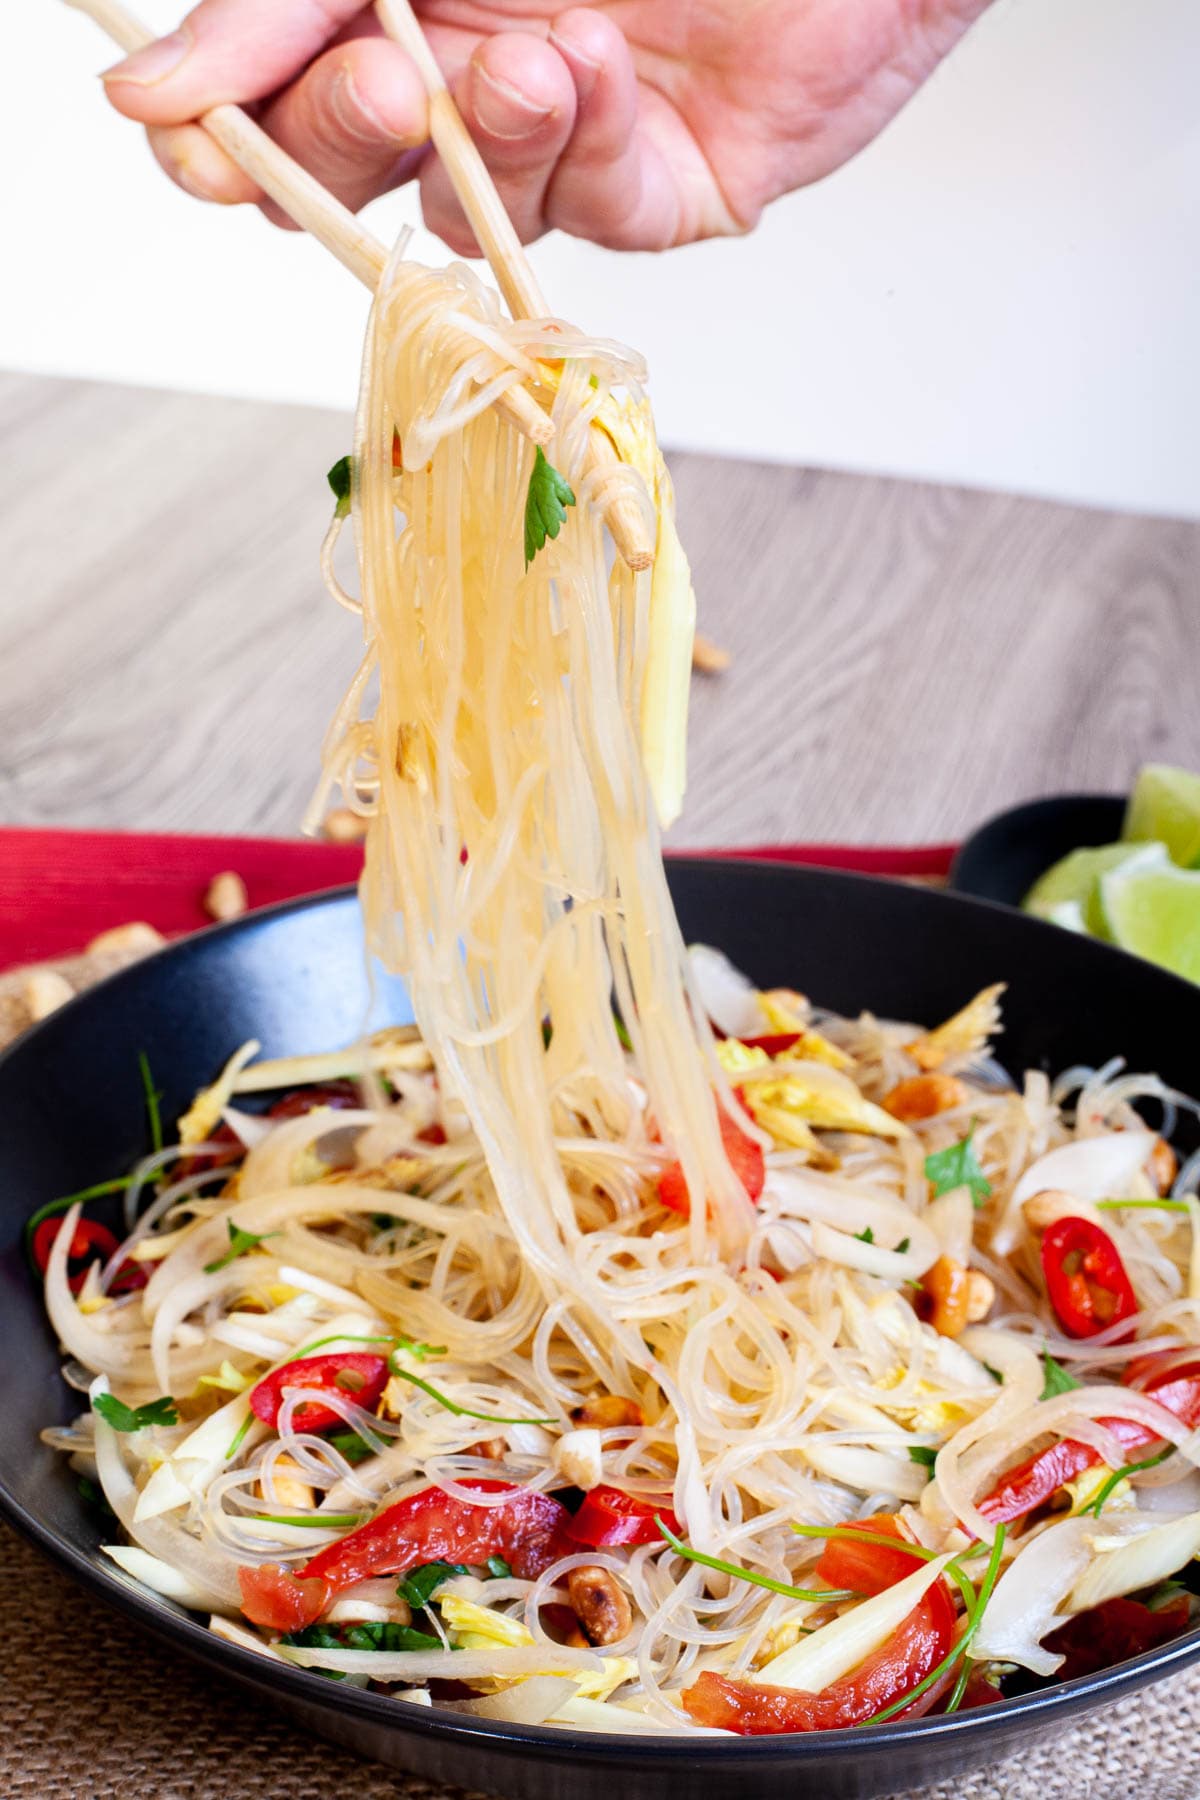 Black plate on a red mate with thin glass noodles, sliced tomatoes, roasted peanuts, sliced onion, sliced chili peppers, chopped green herbs. A hand is holding chopsticks and lifting thin noodles up the air.